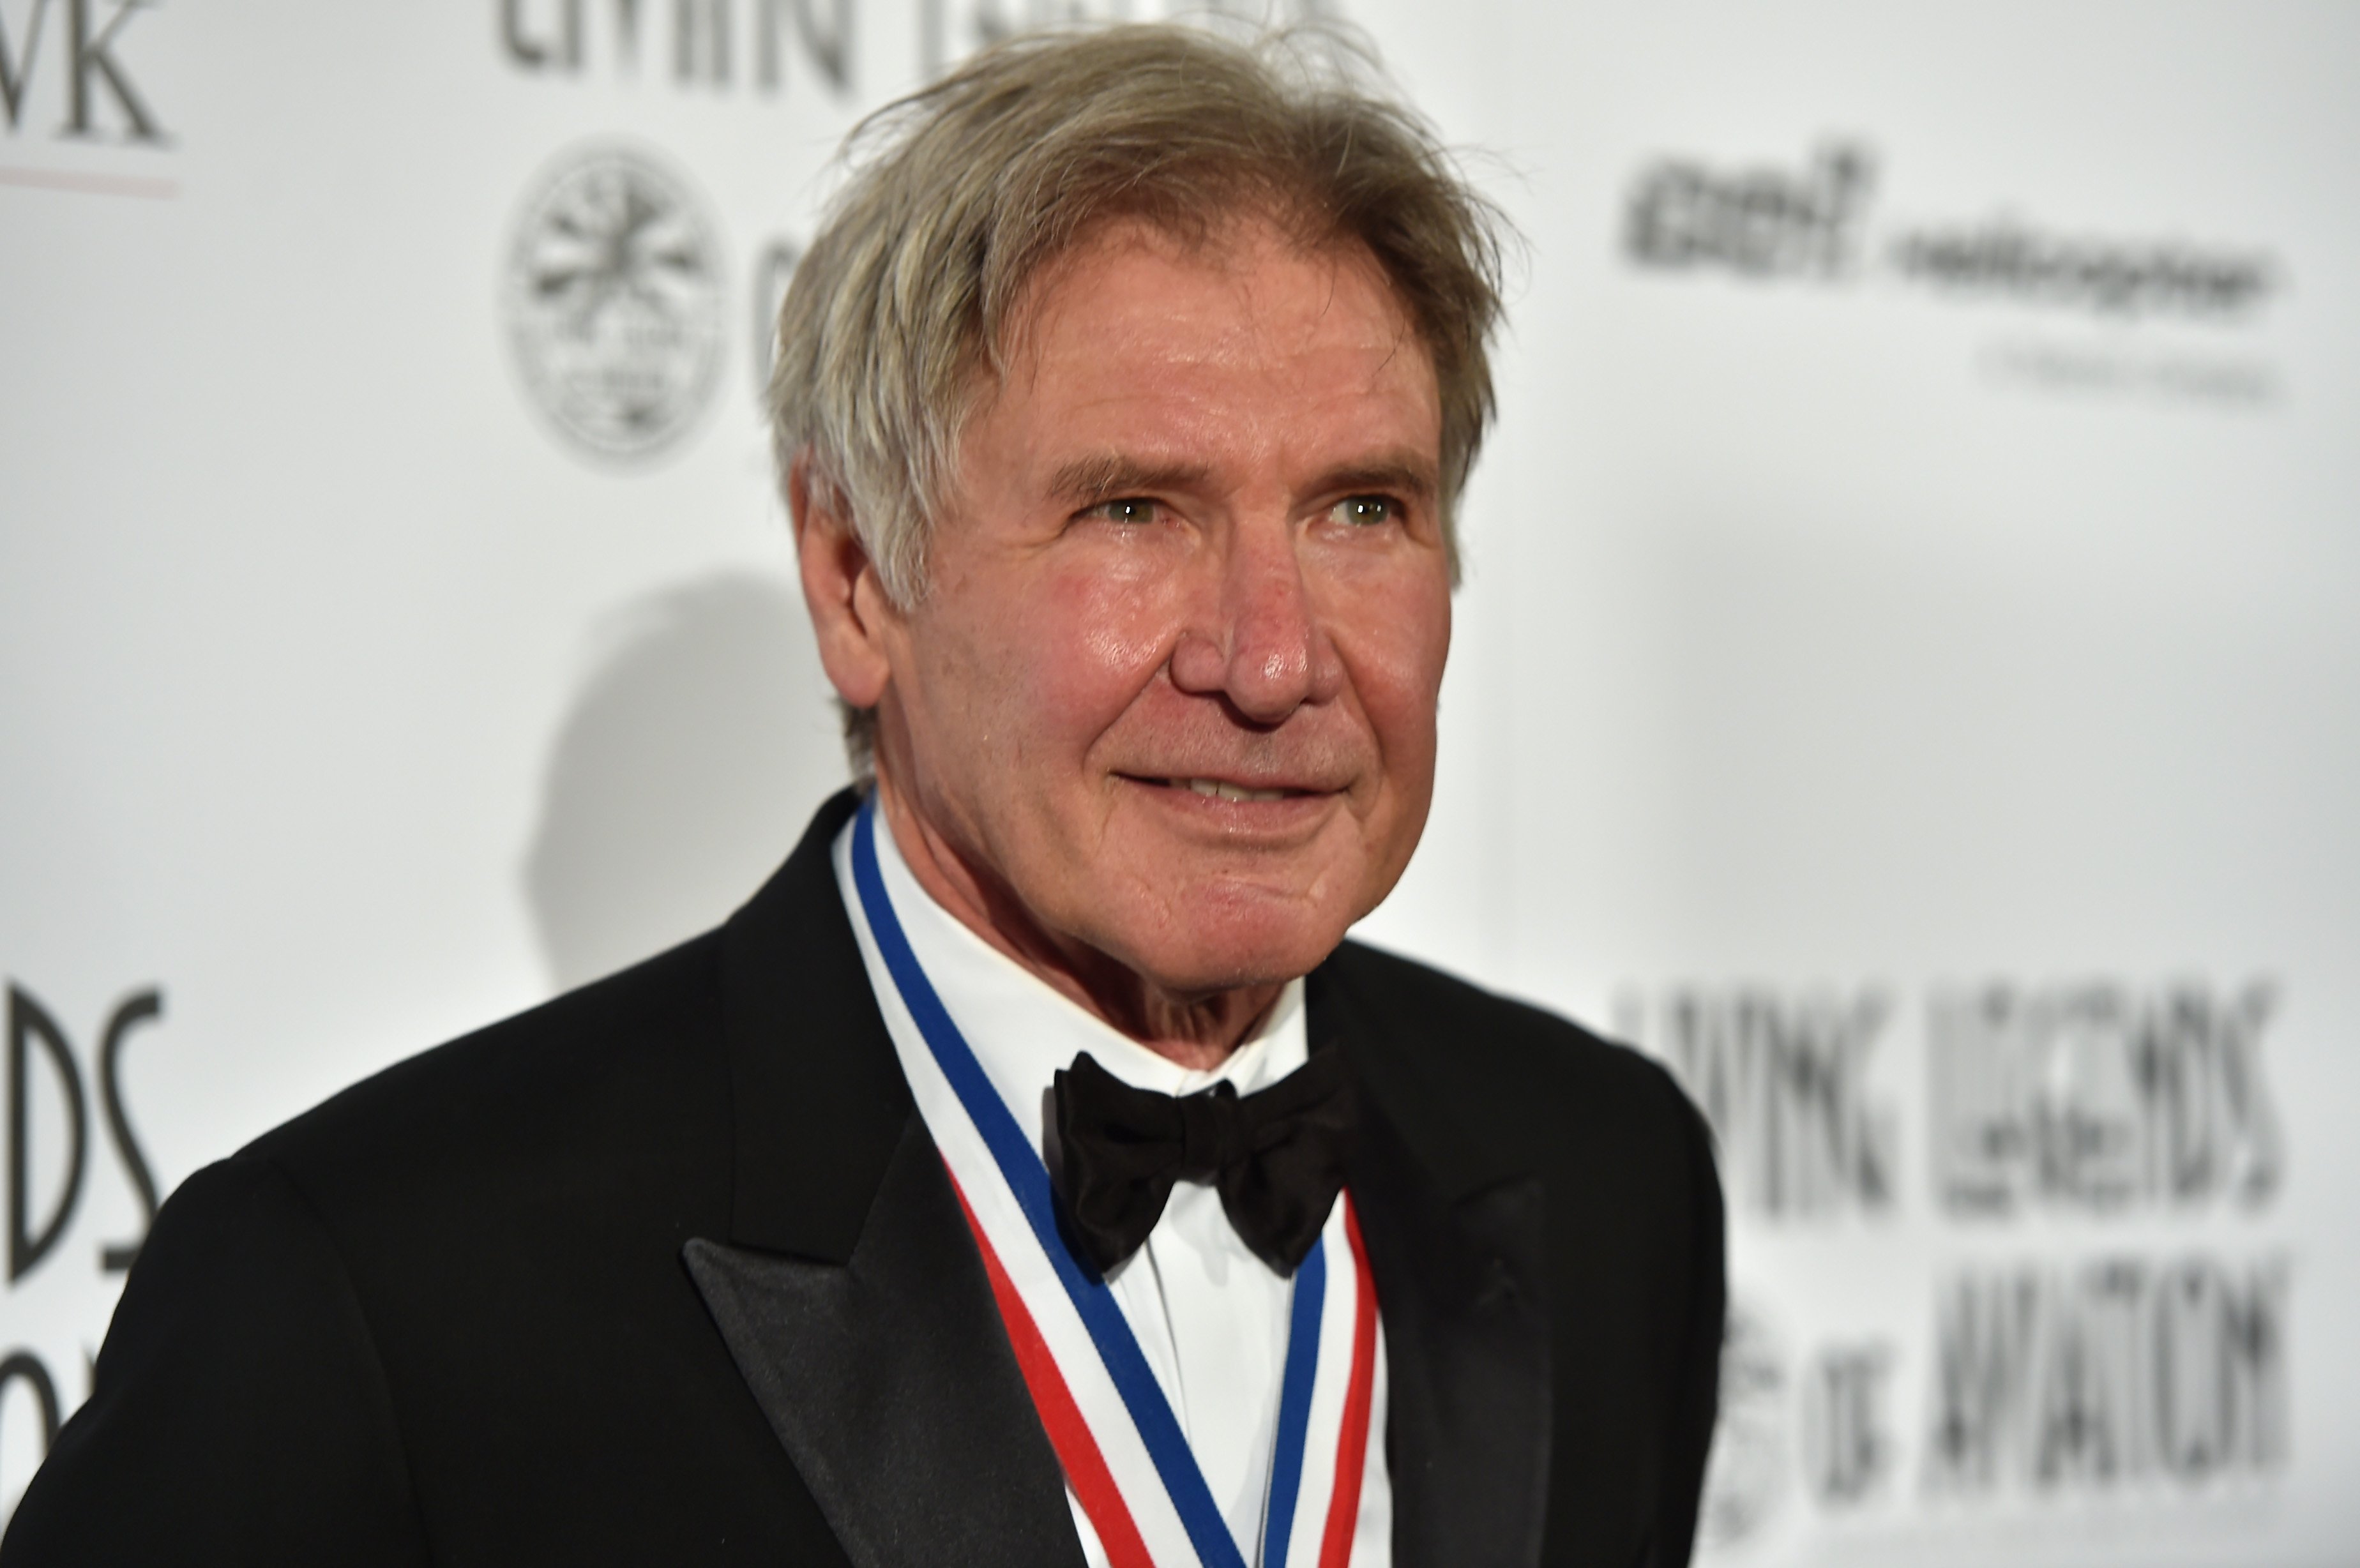  Actor Harrison Ford attends the 12th Annual "Living Legends of Aviation" at The Beverly Hilton Hotel on January 16, 2015. | Photo: Getty Images